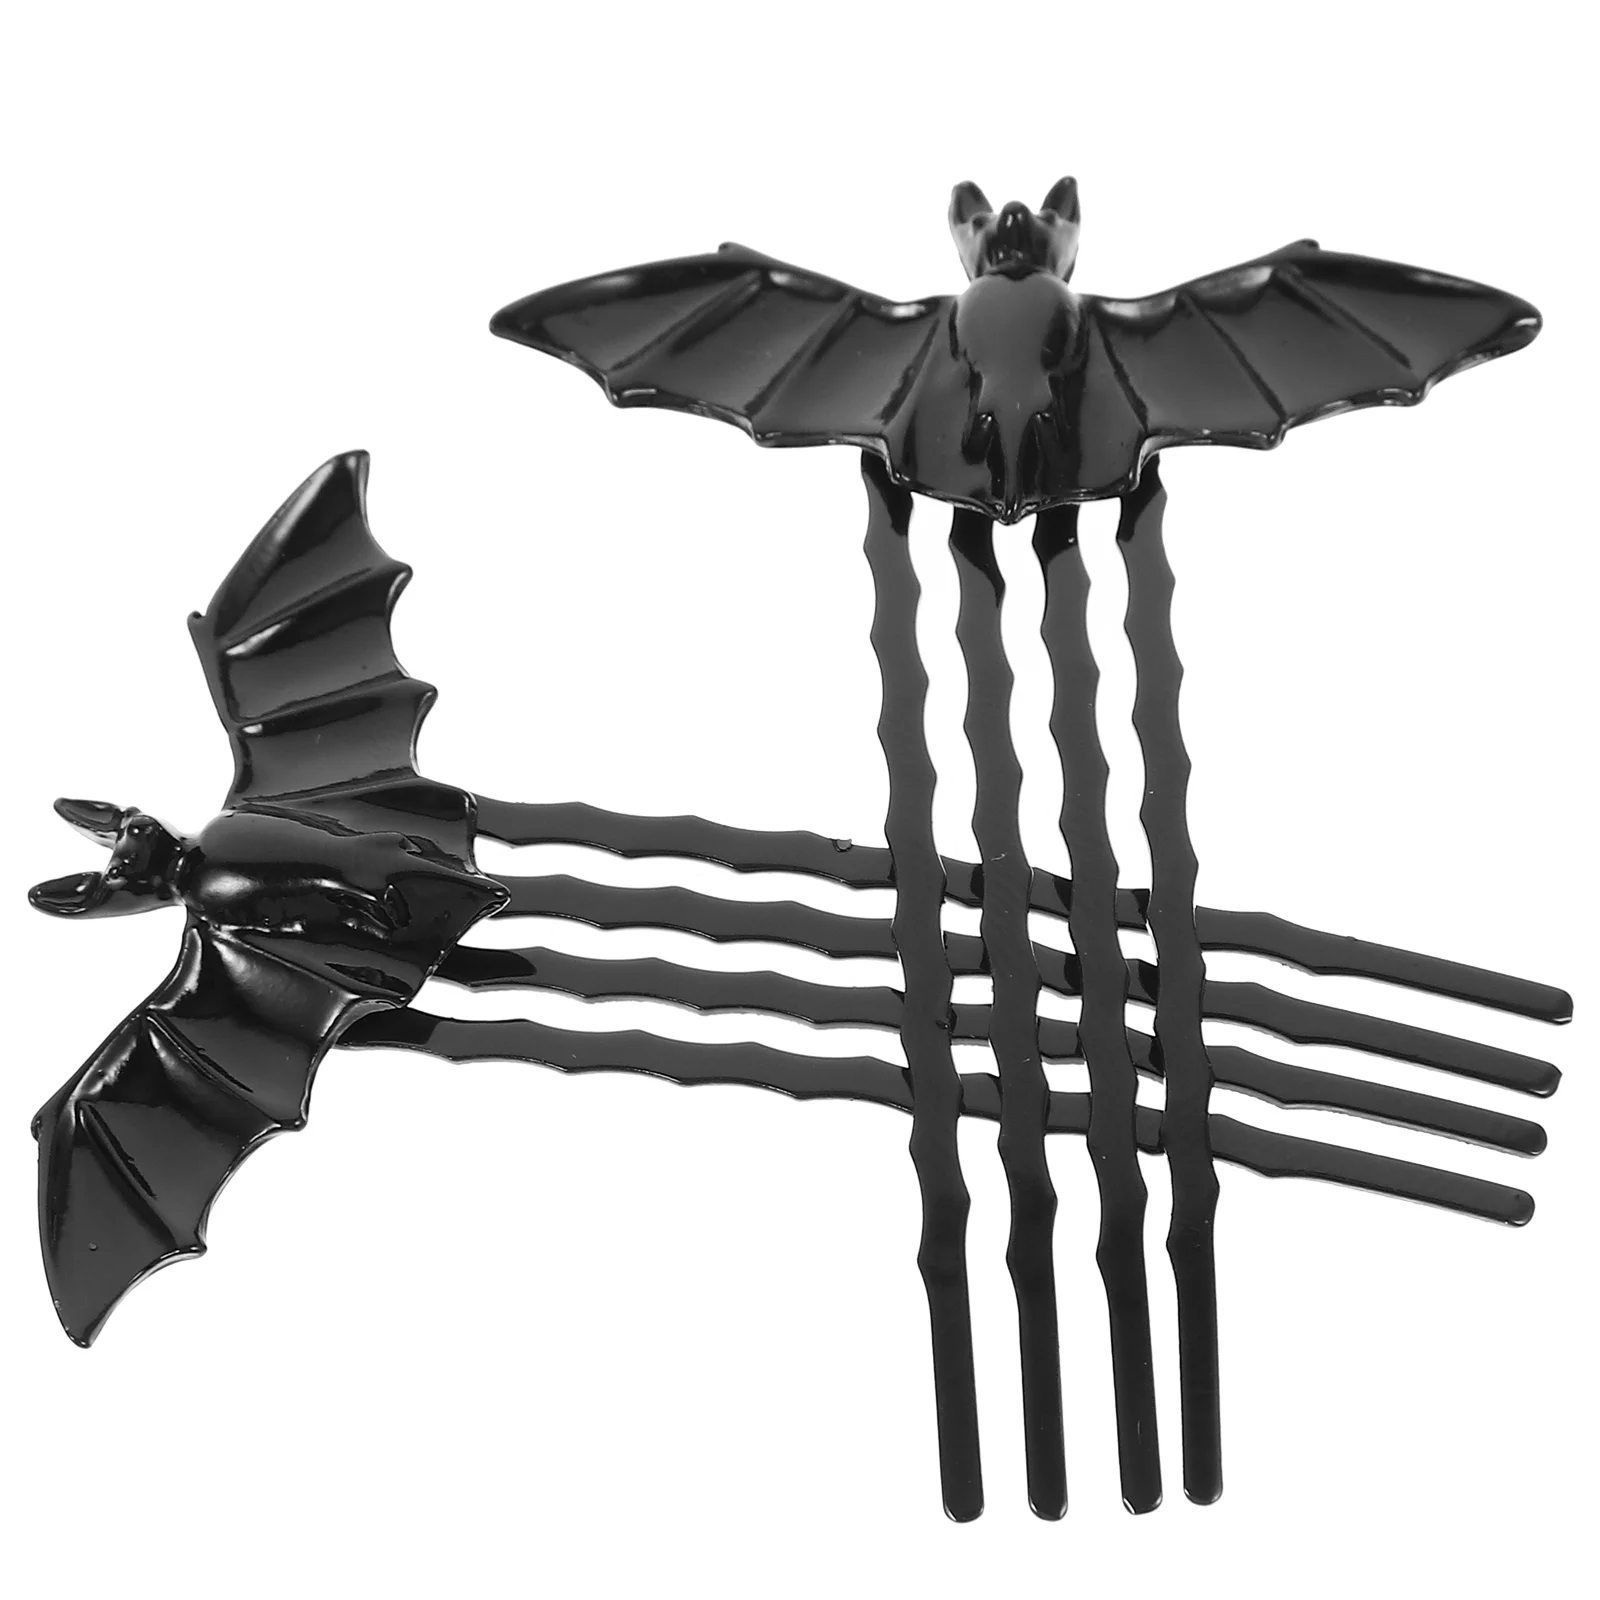 

2pcs Halloween Hair Combs Bat Shape Hairpin Combs Party Headwear Hair Accessories for Carnival Costume